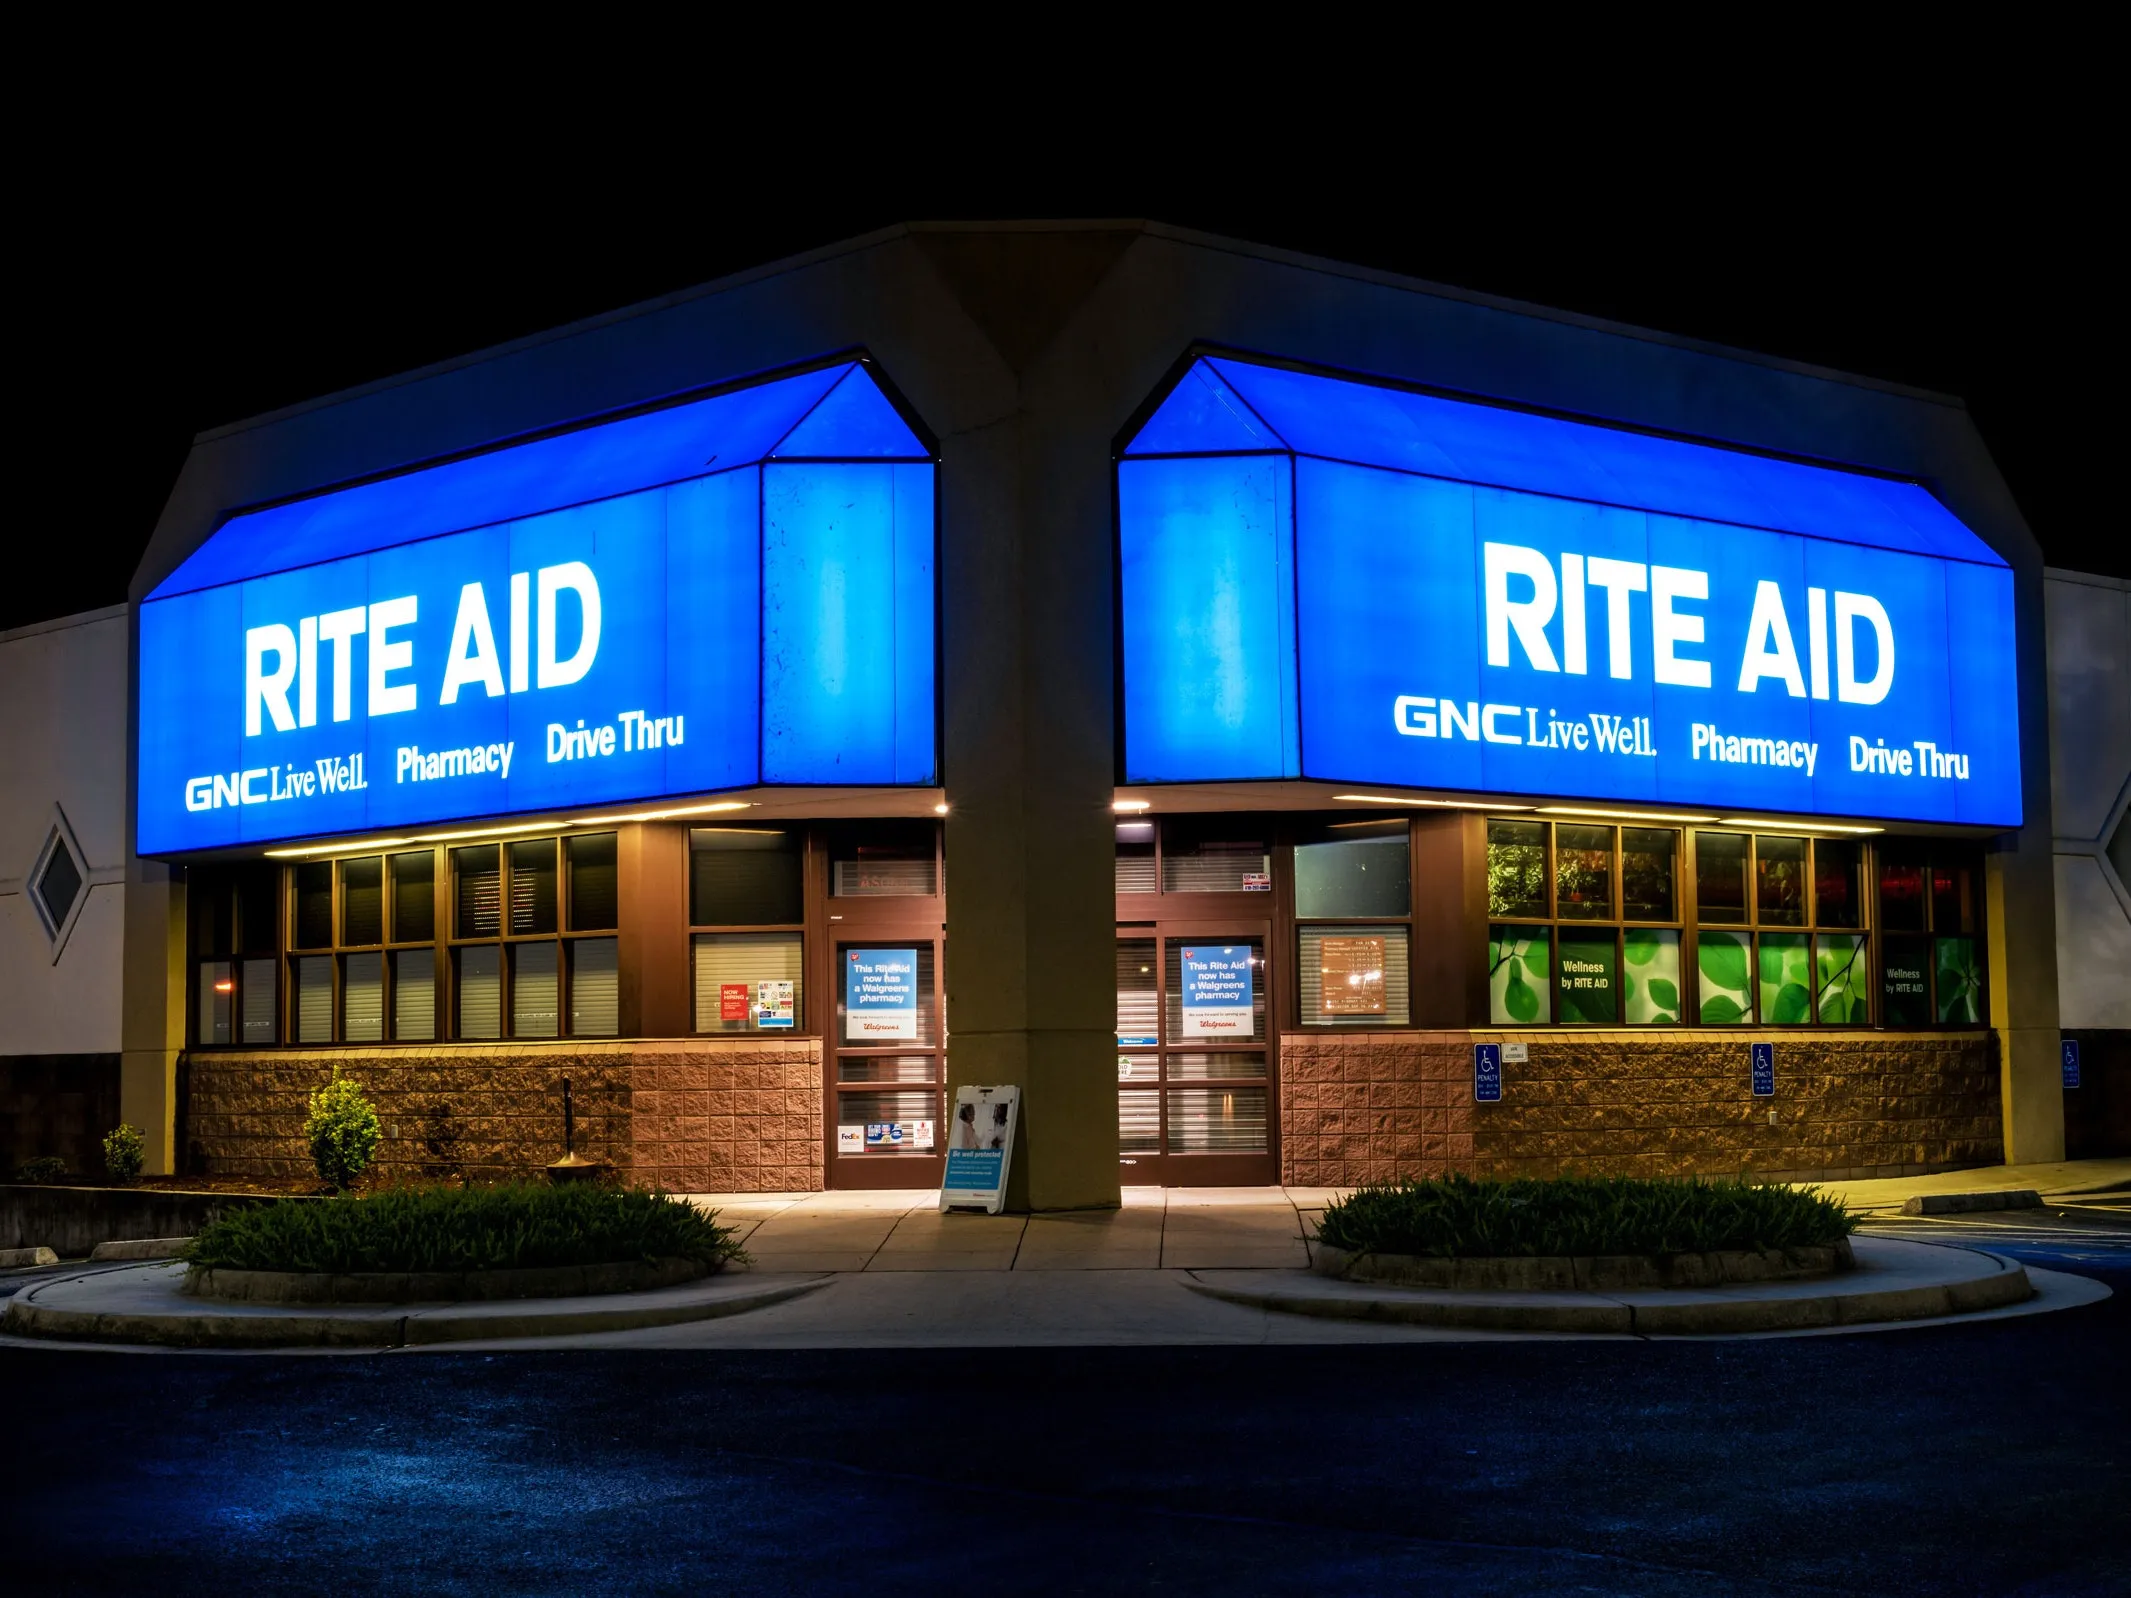 How to Find Rite Aid Store Hours